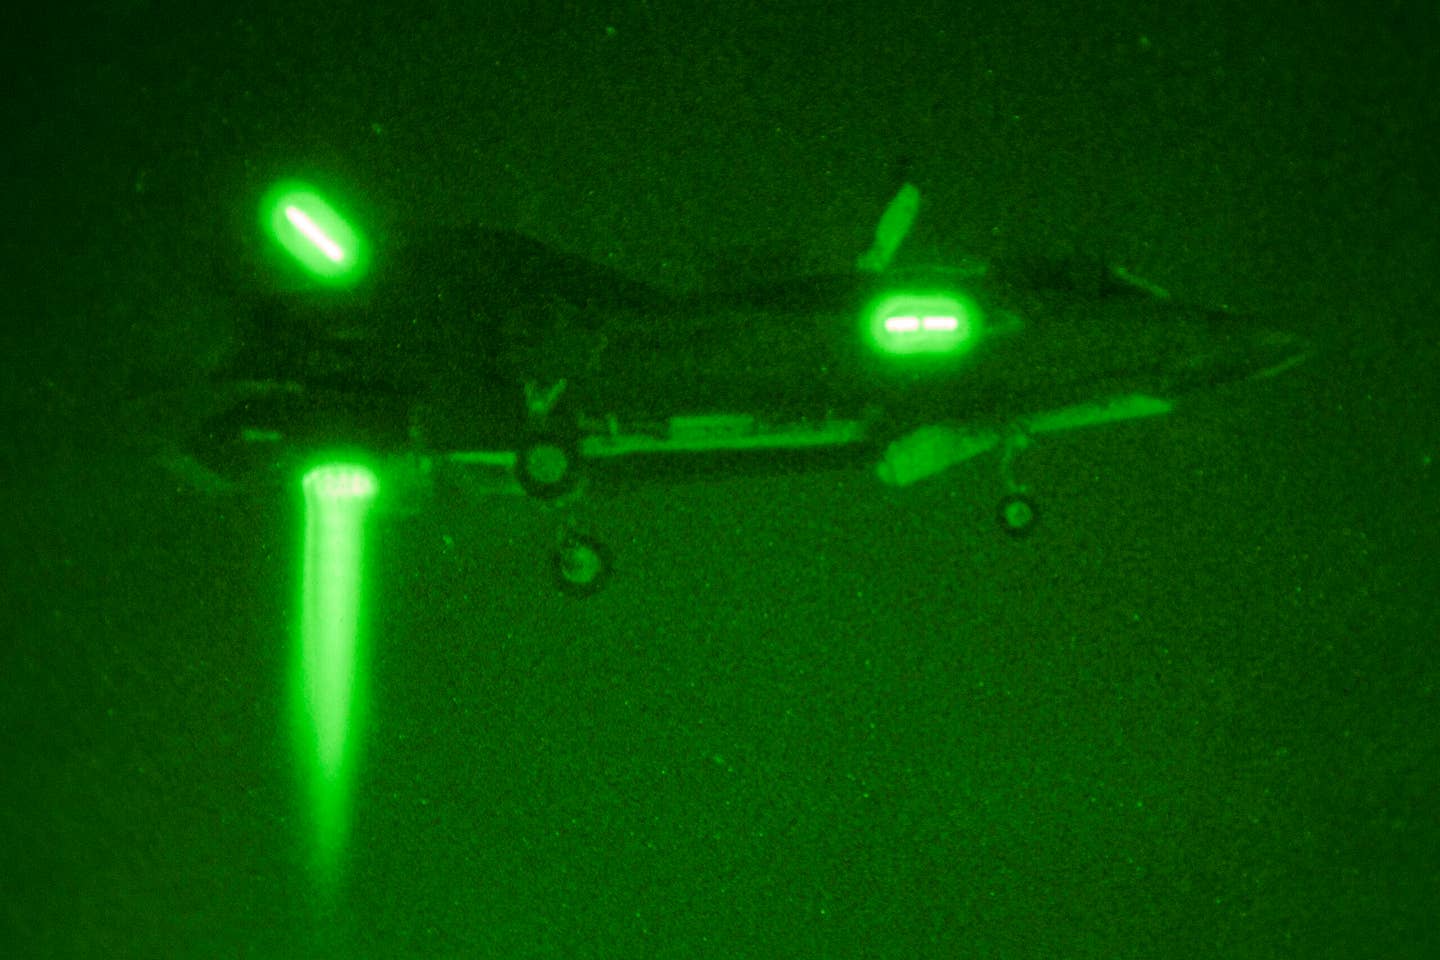 F-35B test aircraft BF-4 hovers in the darkness during a night test flight at NAS Patuxent River, Maryland, December 13, 2012. <em>Lockheed Martin</em>